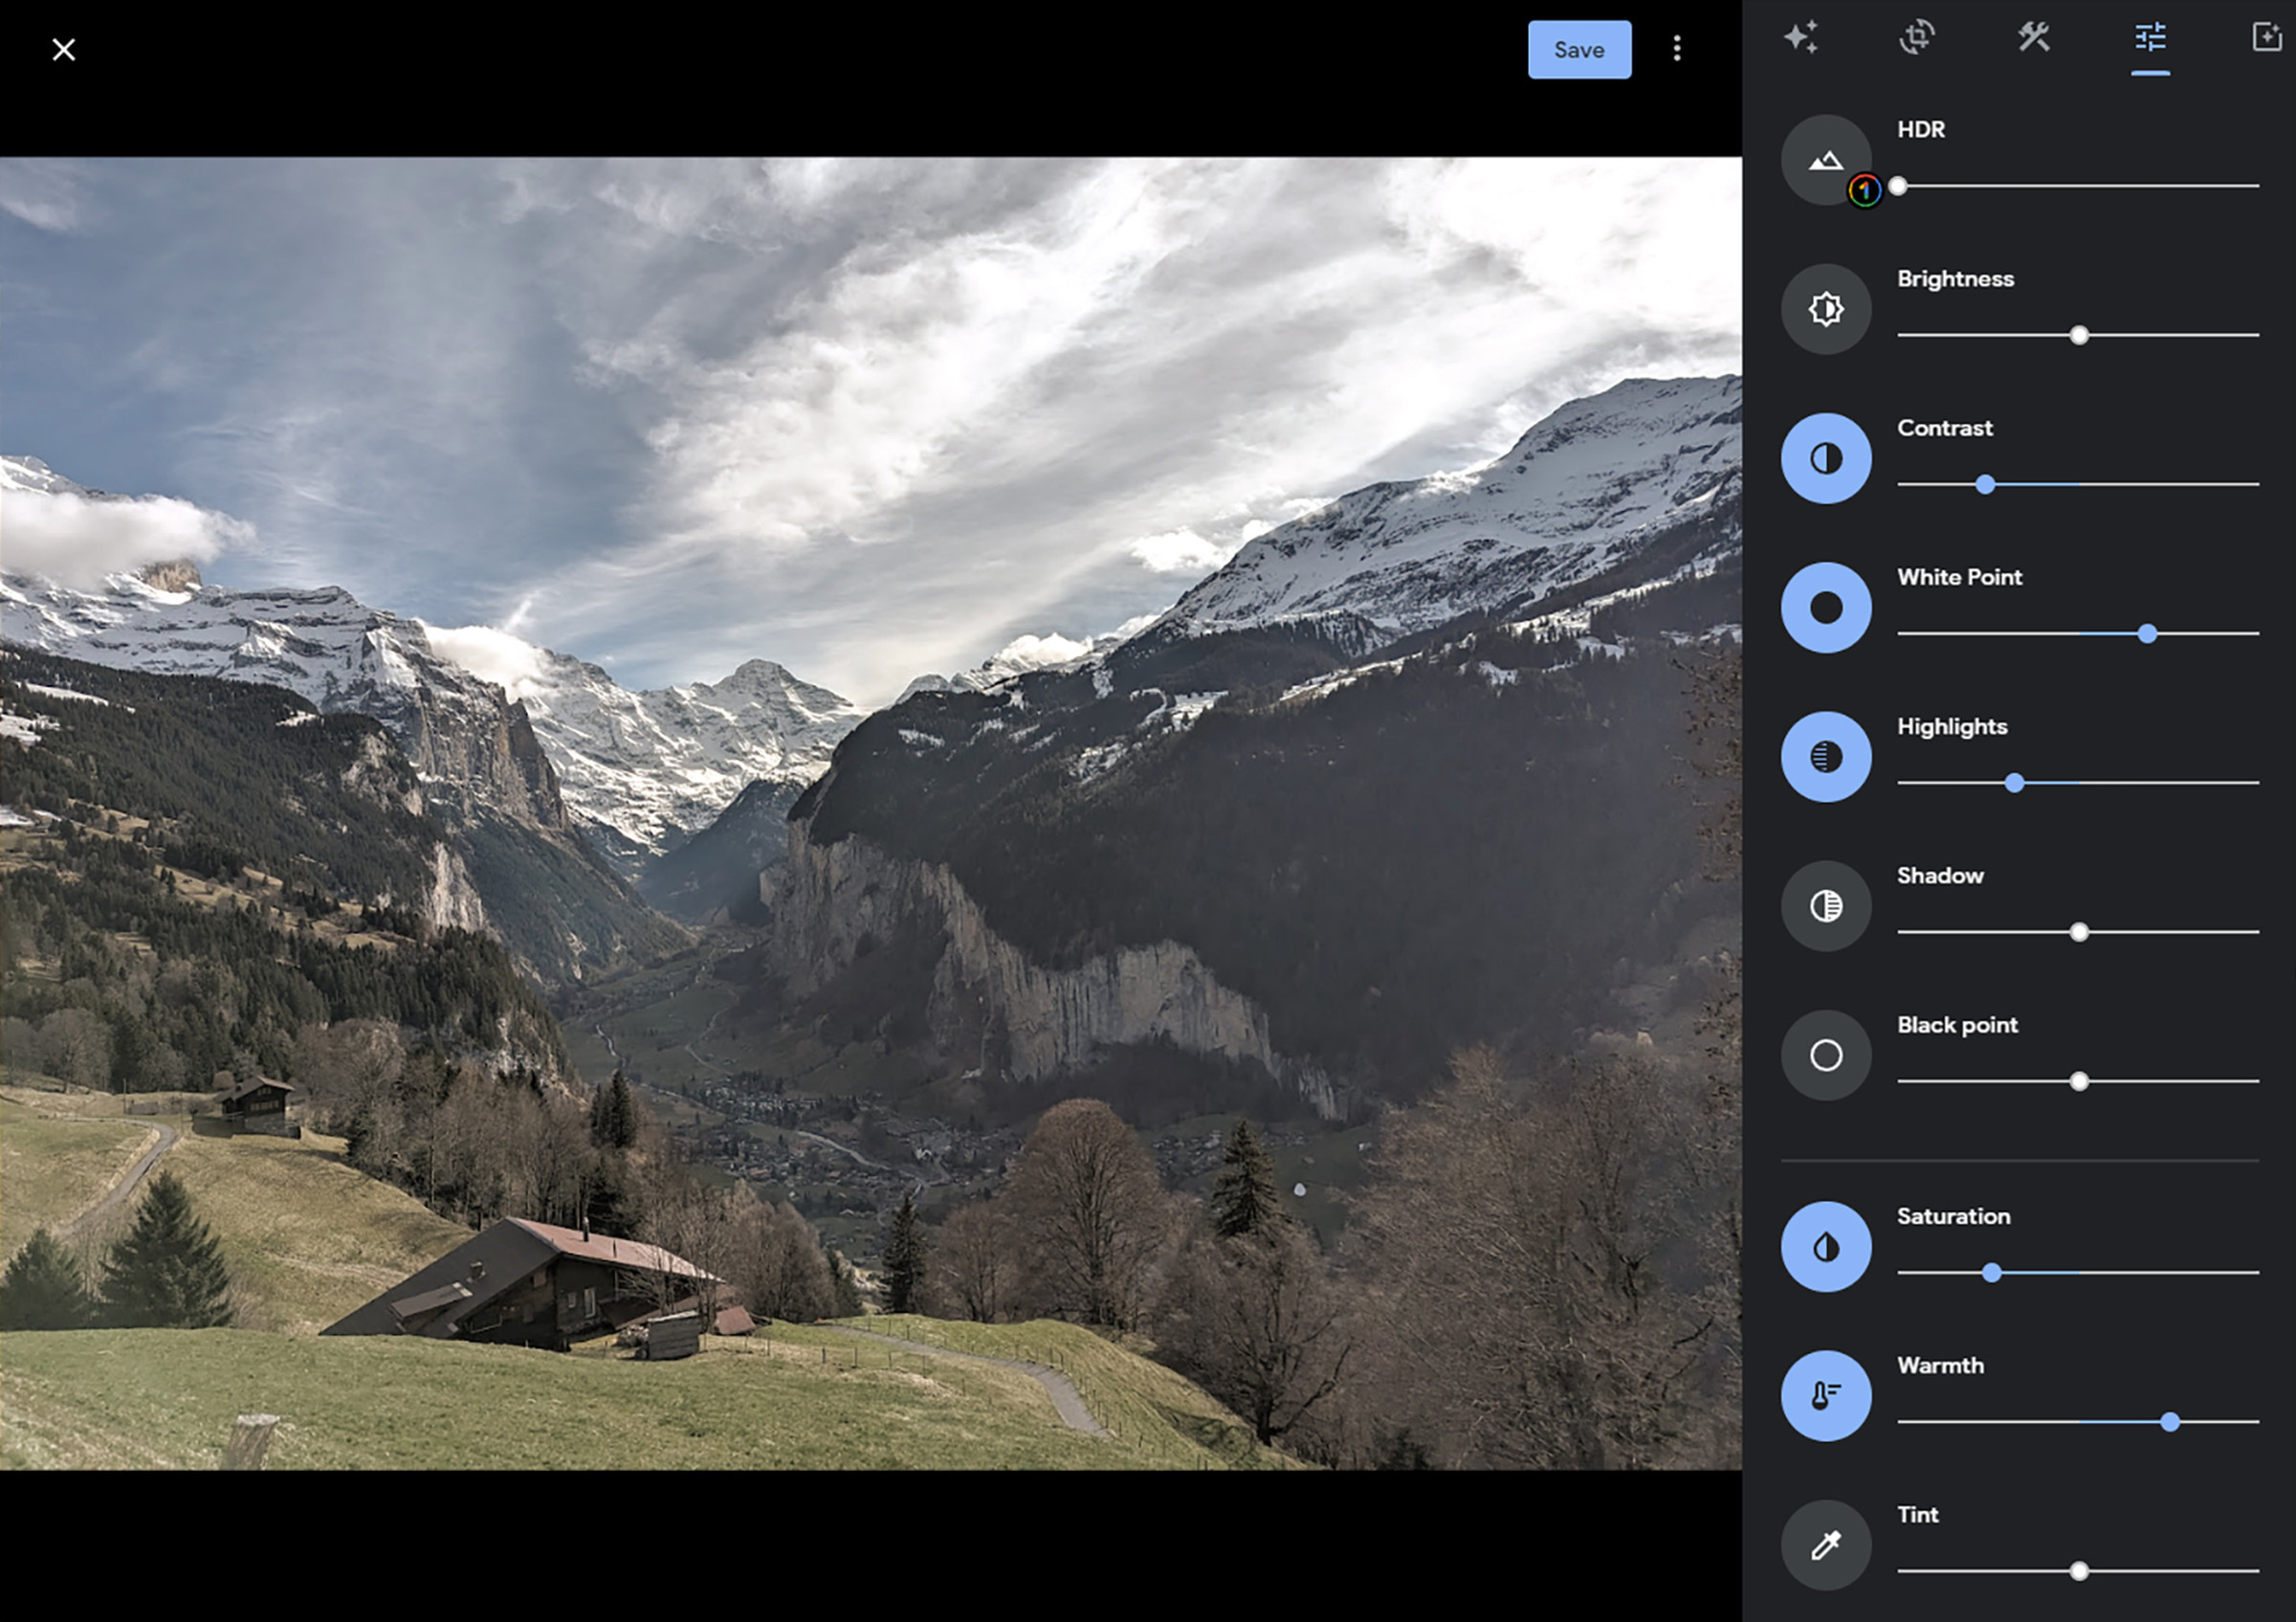 Landscape photo with a variety of icons and slider controls at right.